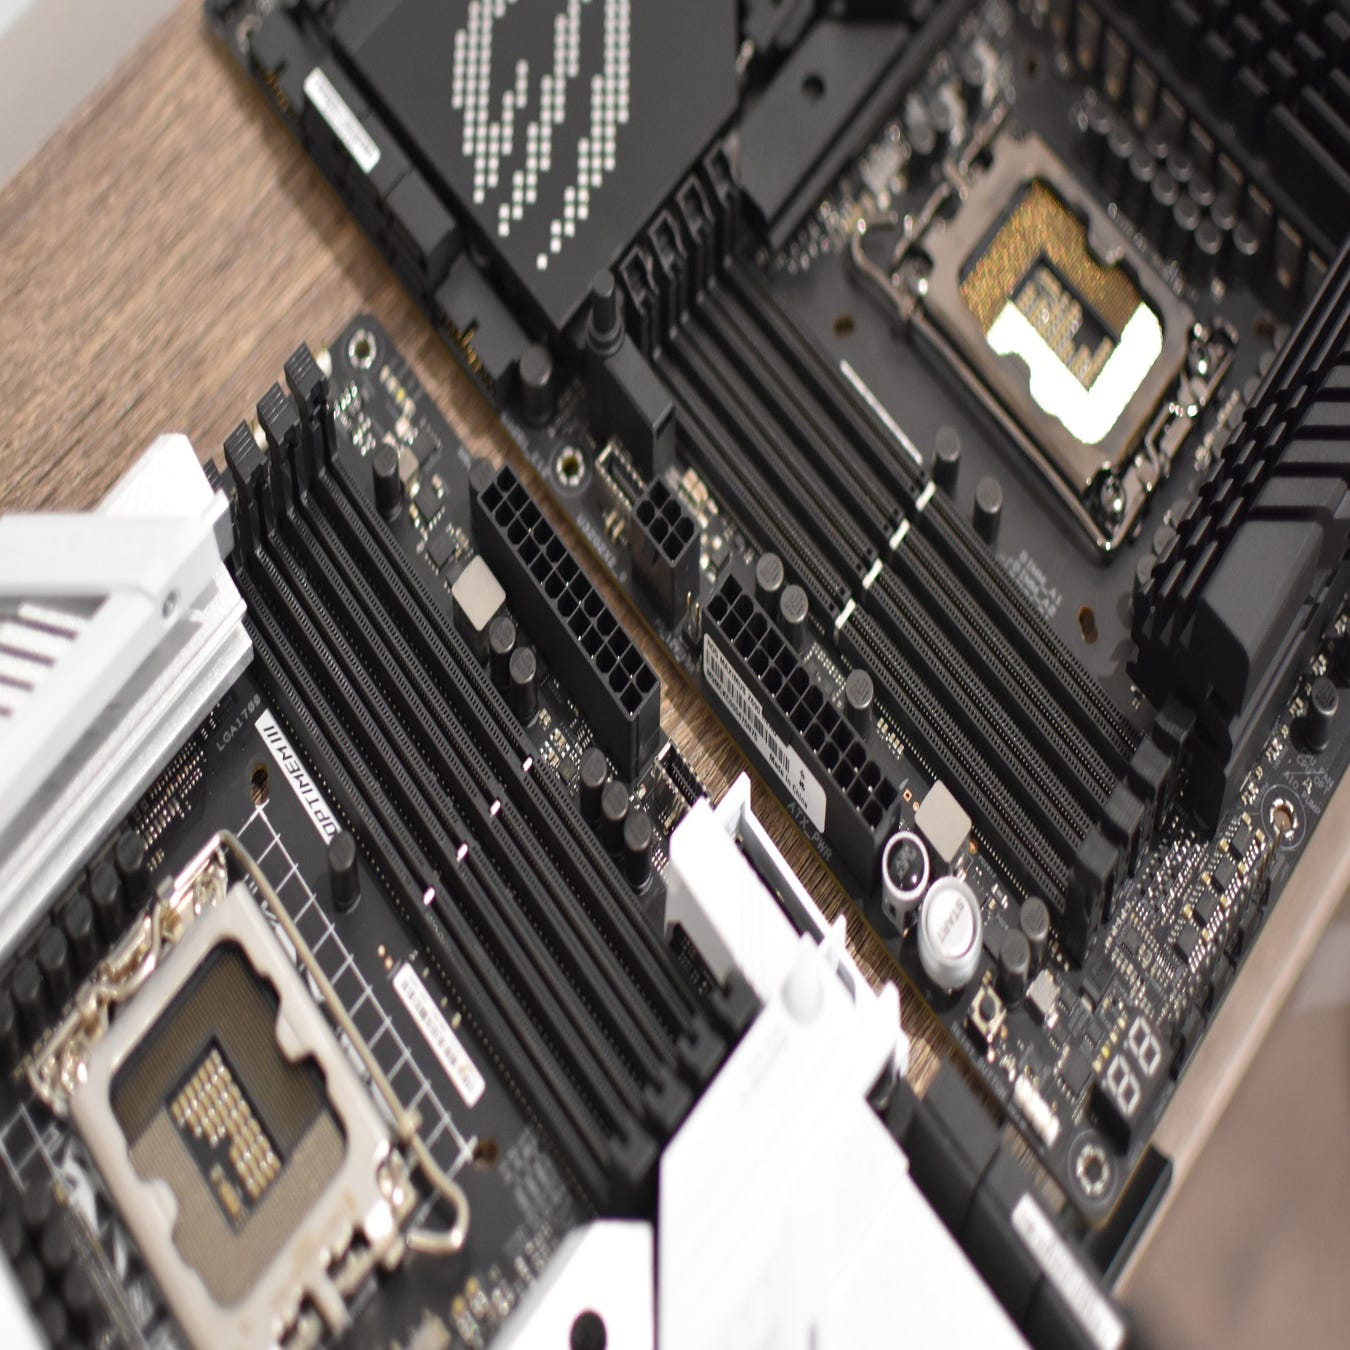 DDR5 vs DDR4: Which RAM is best for gaming and content creation?